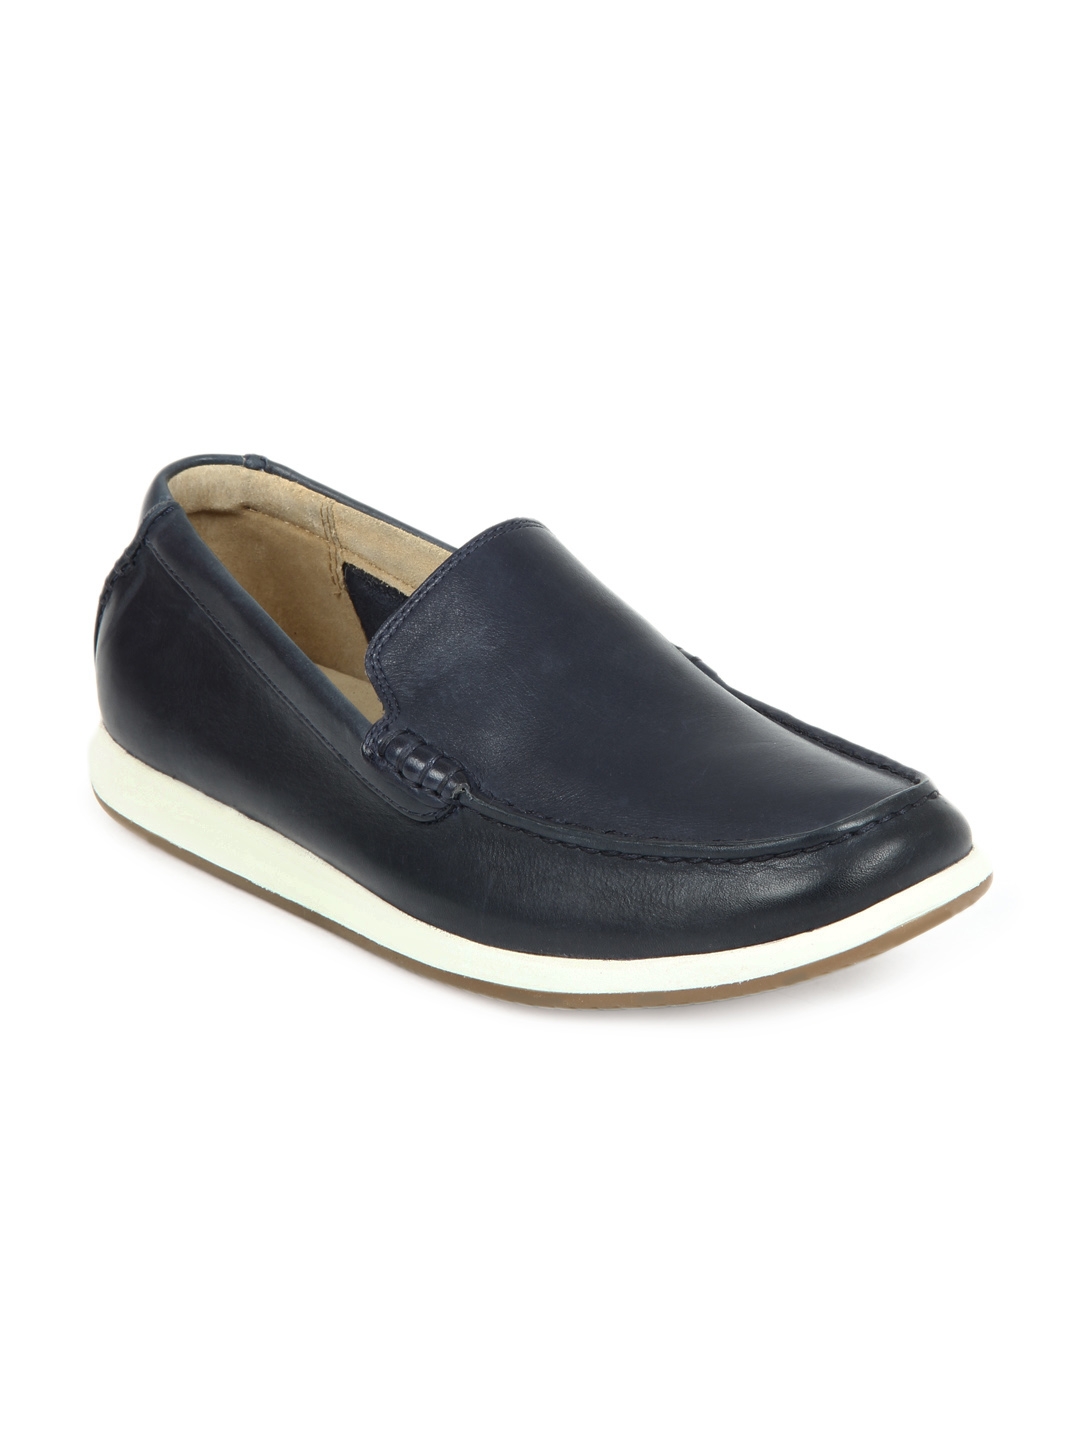 Clarks Men Navy Loafers - Casual Shoes 